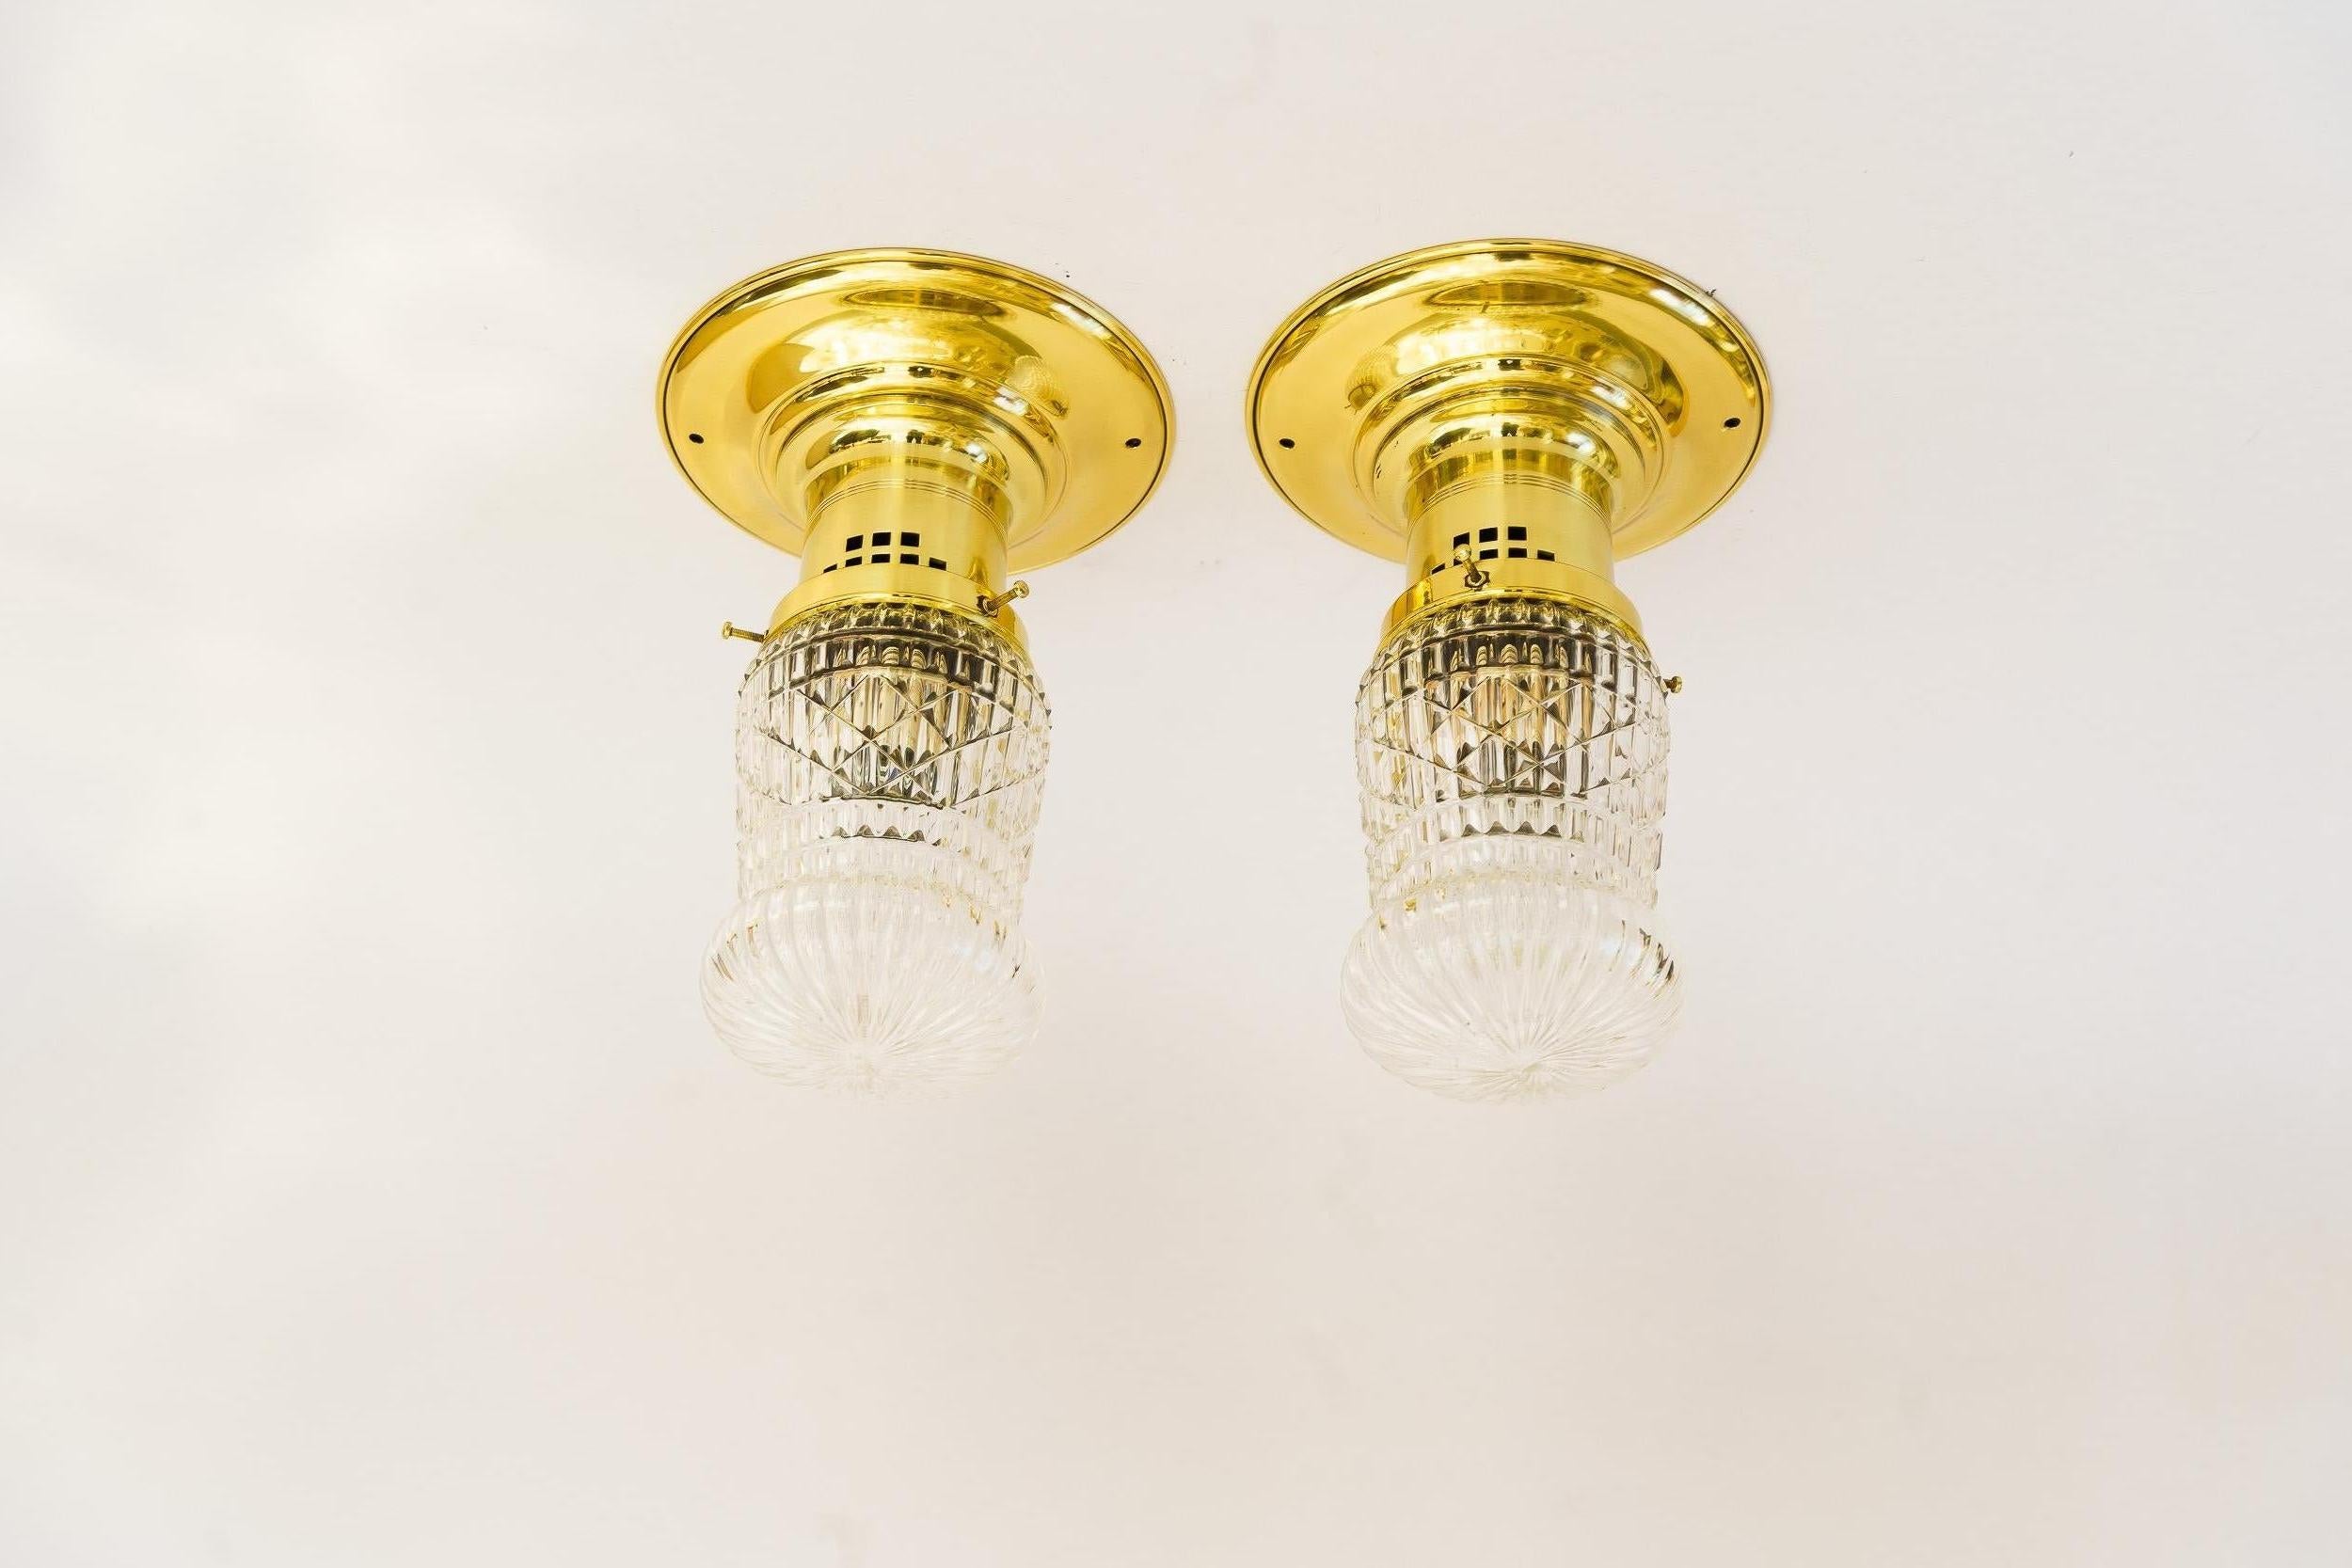 2 ceiling lamps vienna around 1920s
Brass polished and stove enameled
Original antique cut glass shades